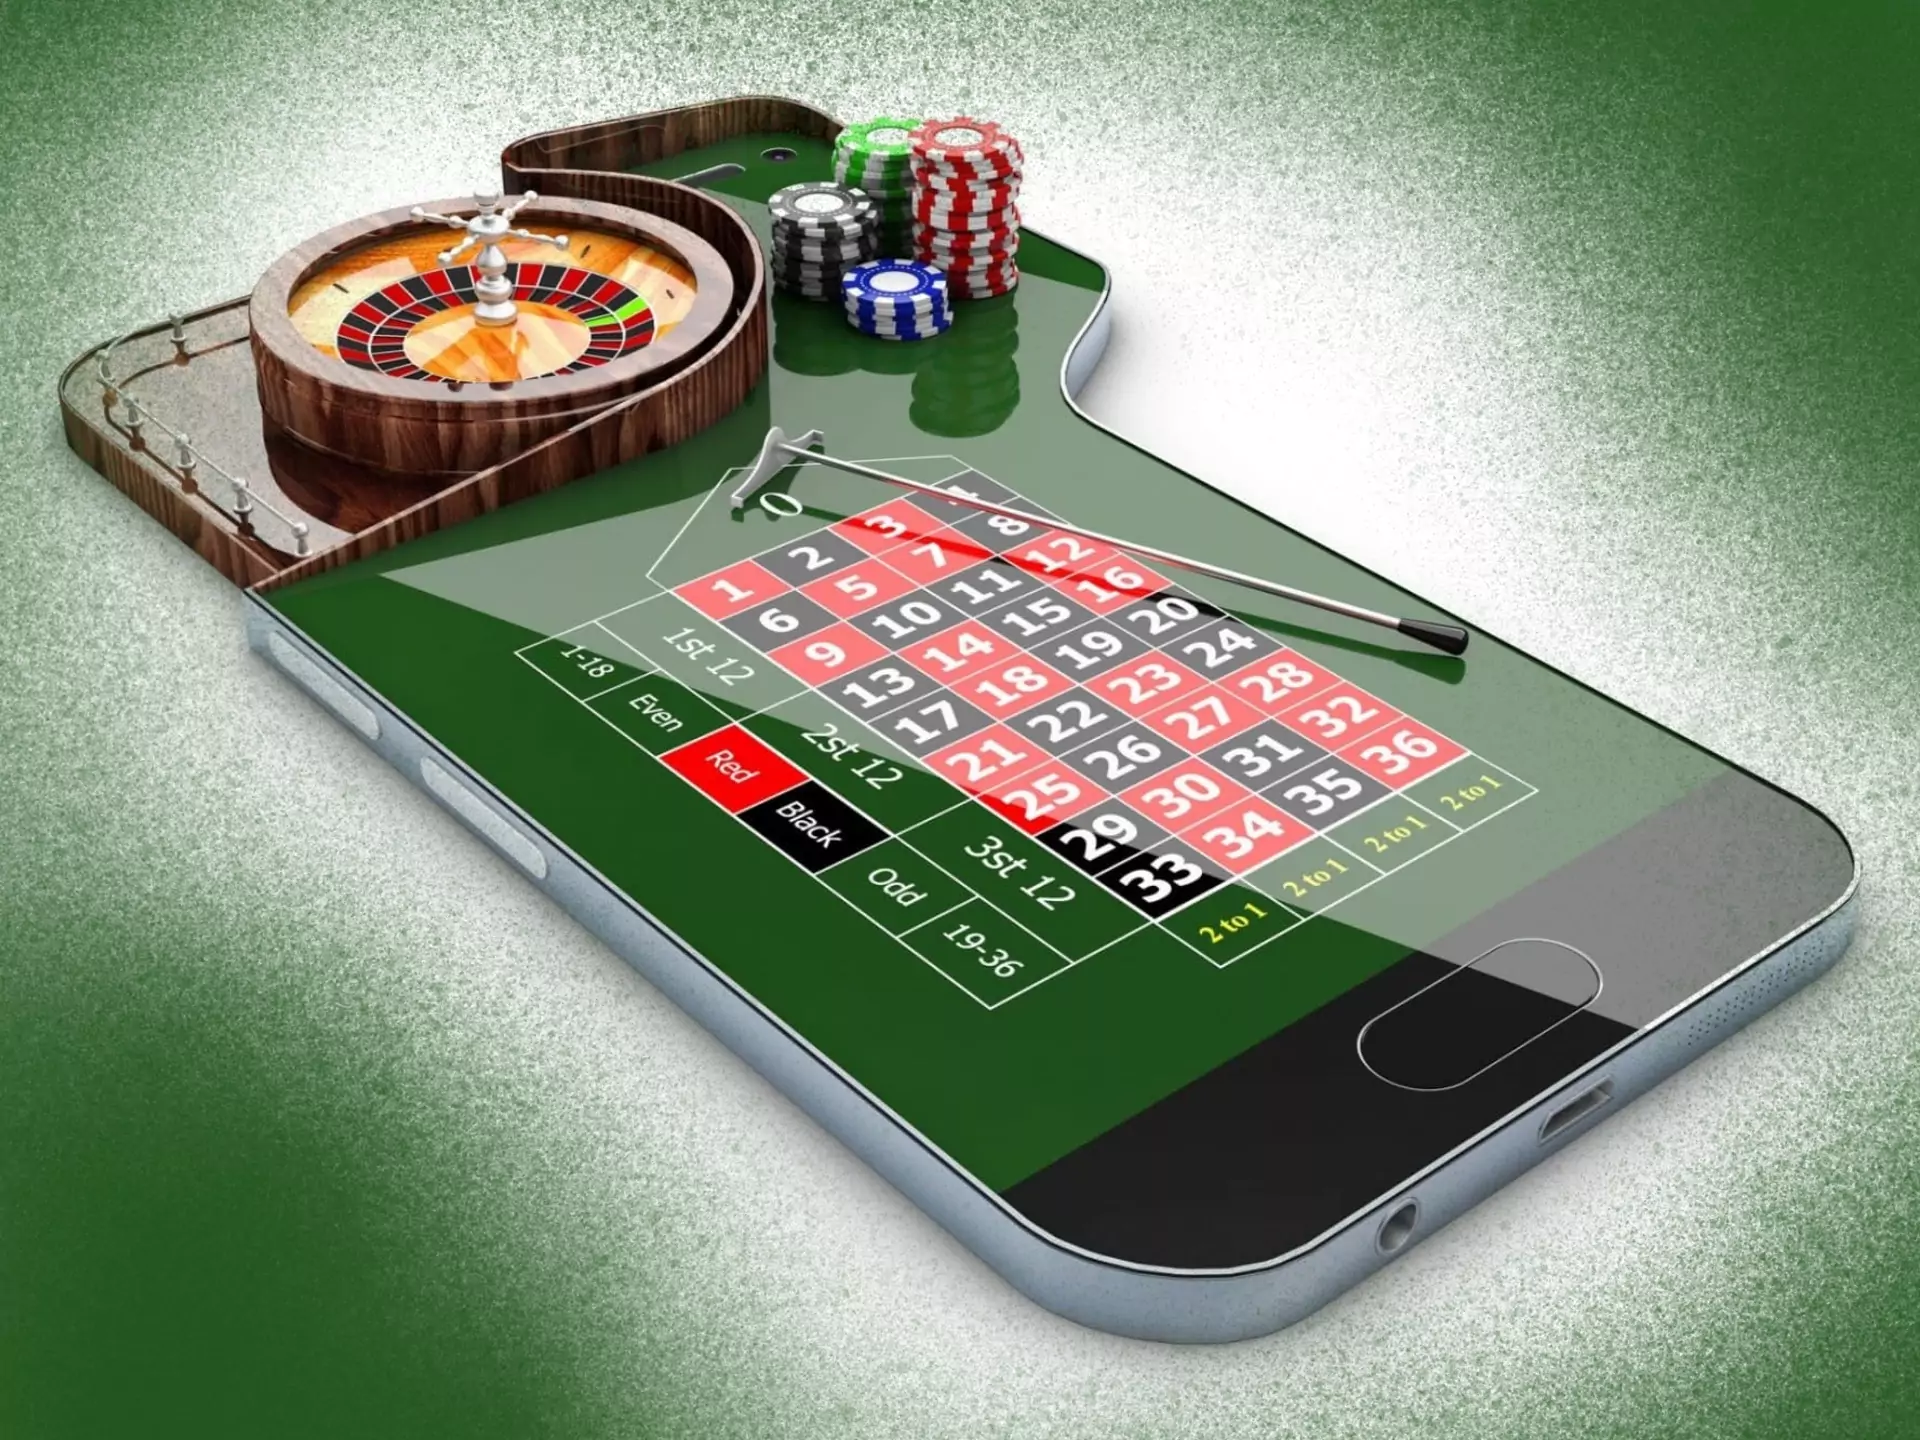 Install an online casino mobile app on your phone and play live roulette whenever you want.